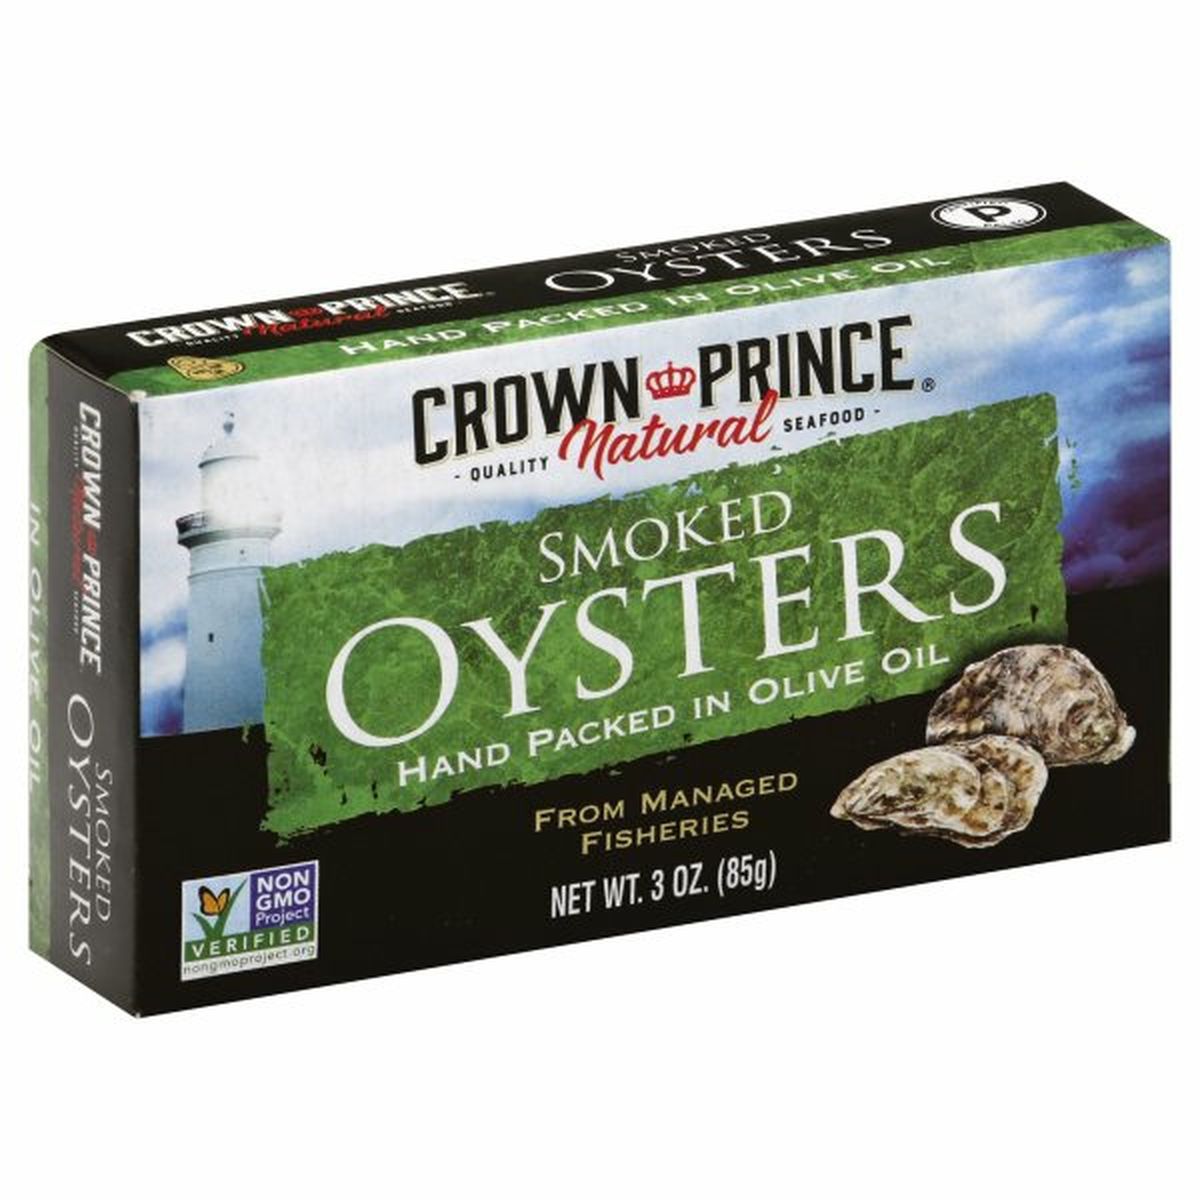 Calories in Crown Prince Oysters, Smoked